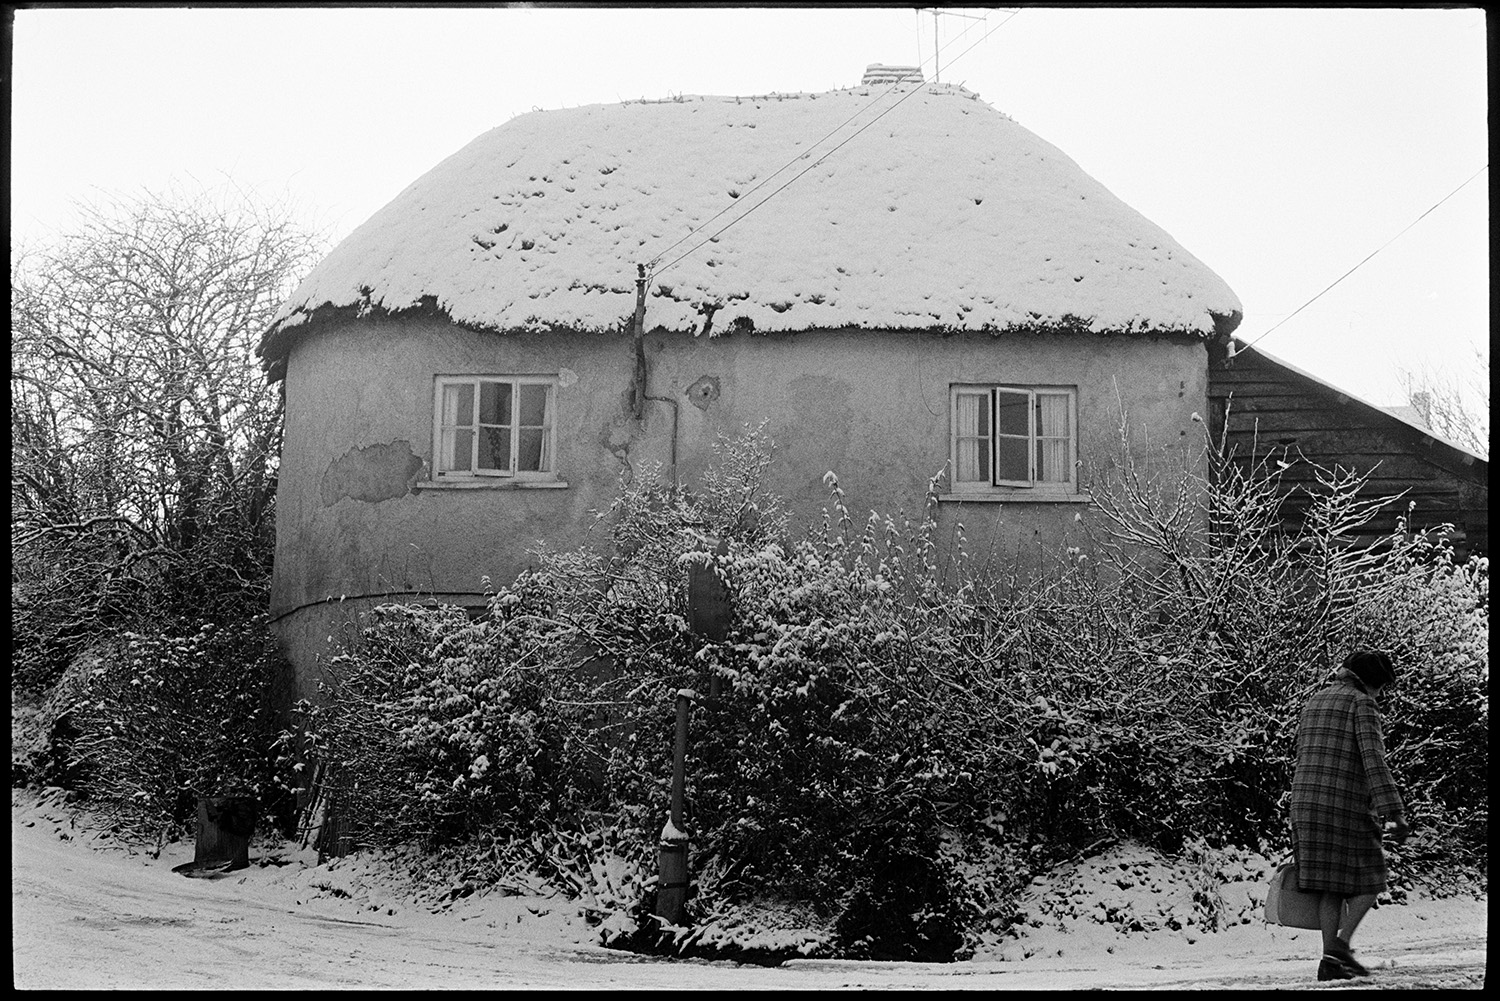 Thatch and cob cottage in snow. 
[A woman walking past a thatch and cob cottage covered in snow in Winkleigh.]